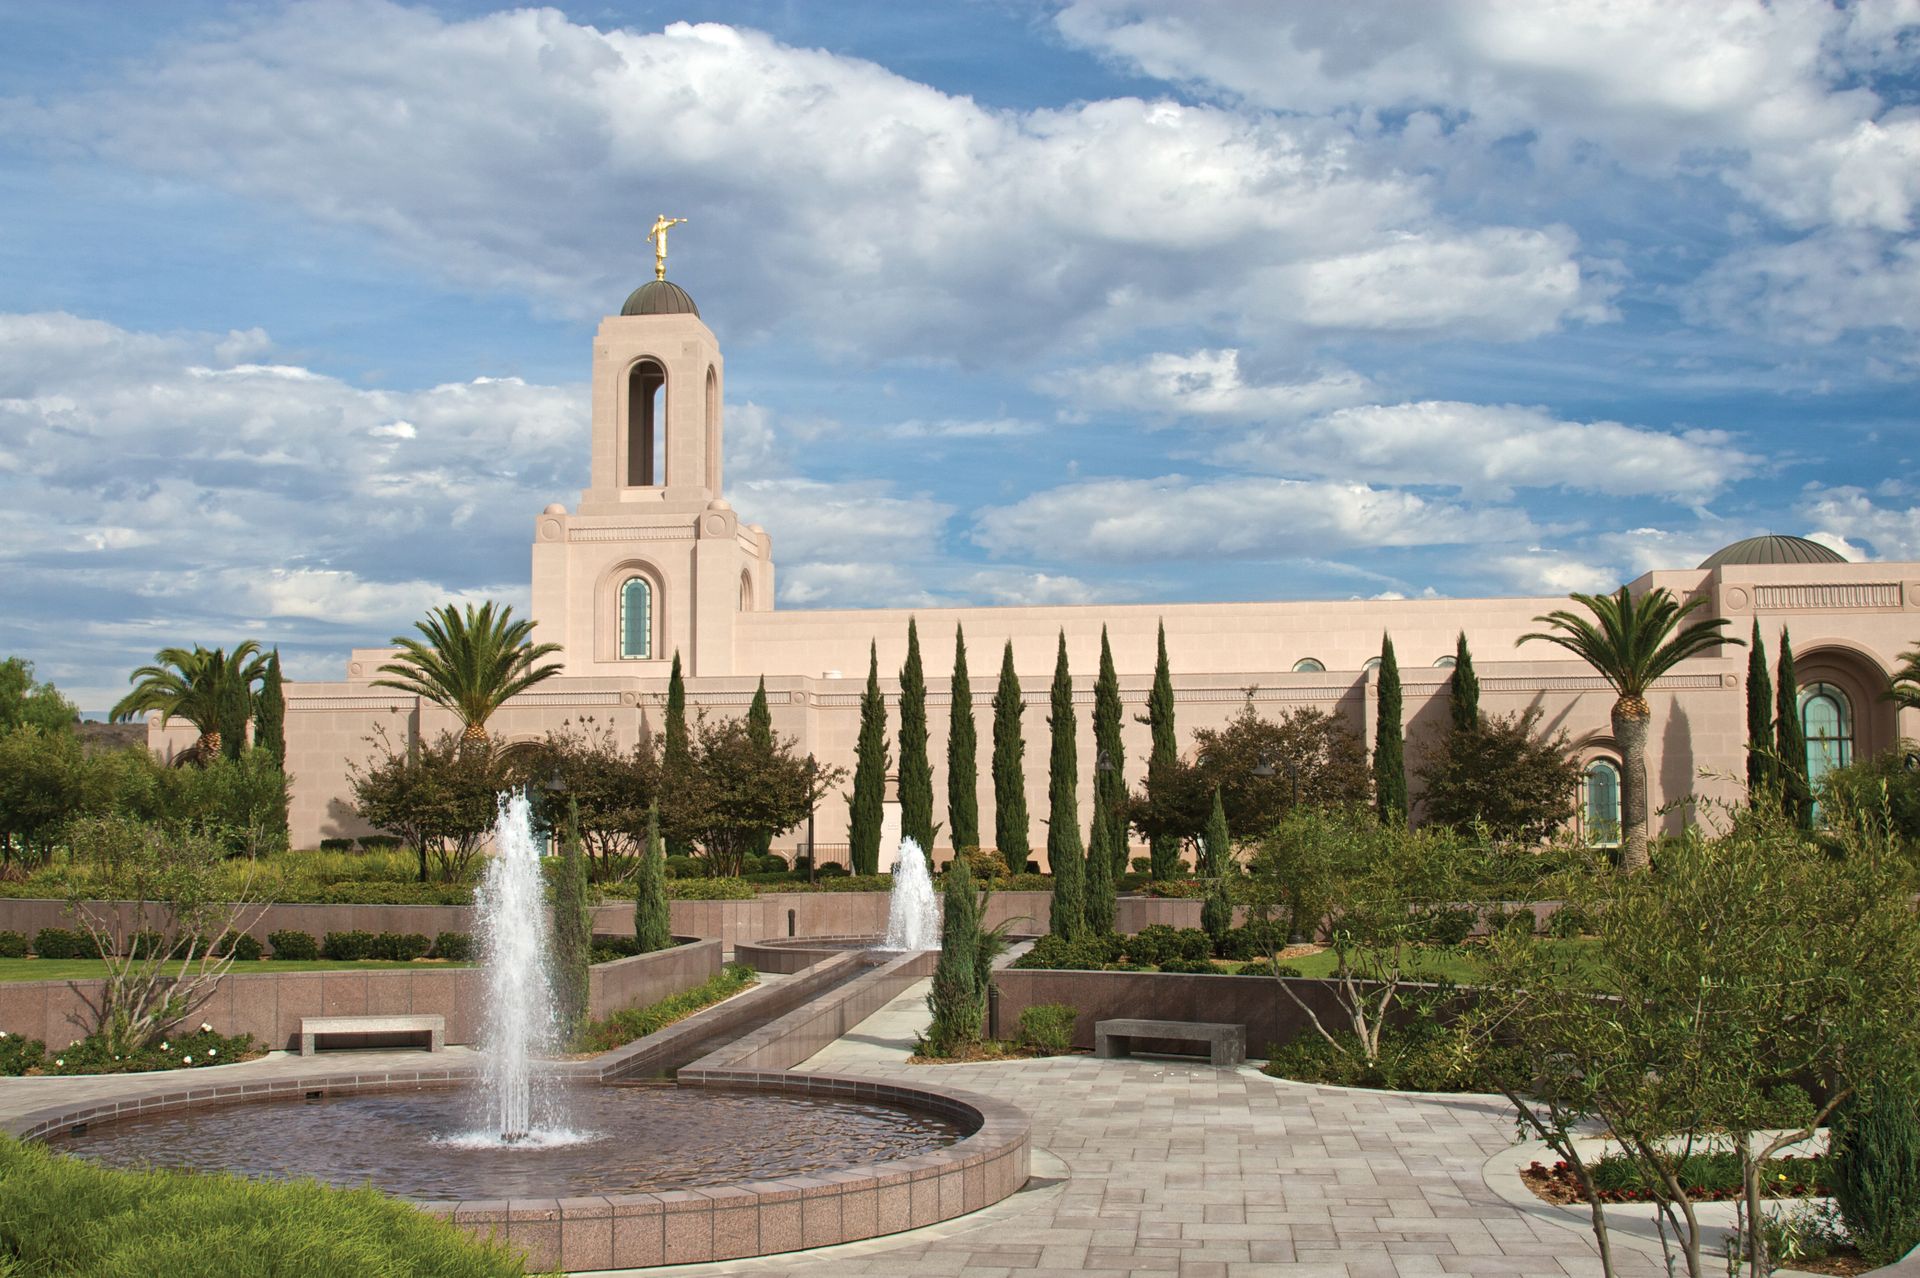 The Newport Beach California Temple, including fountains and scenery.